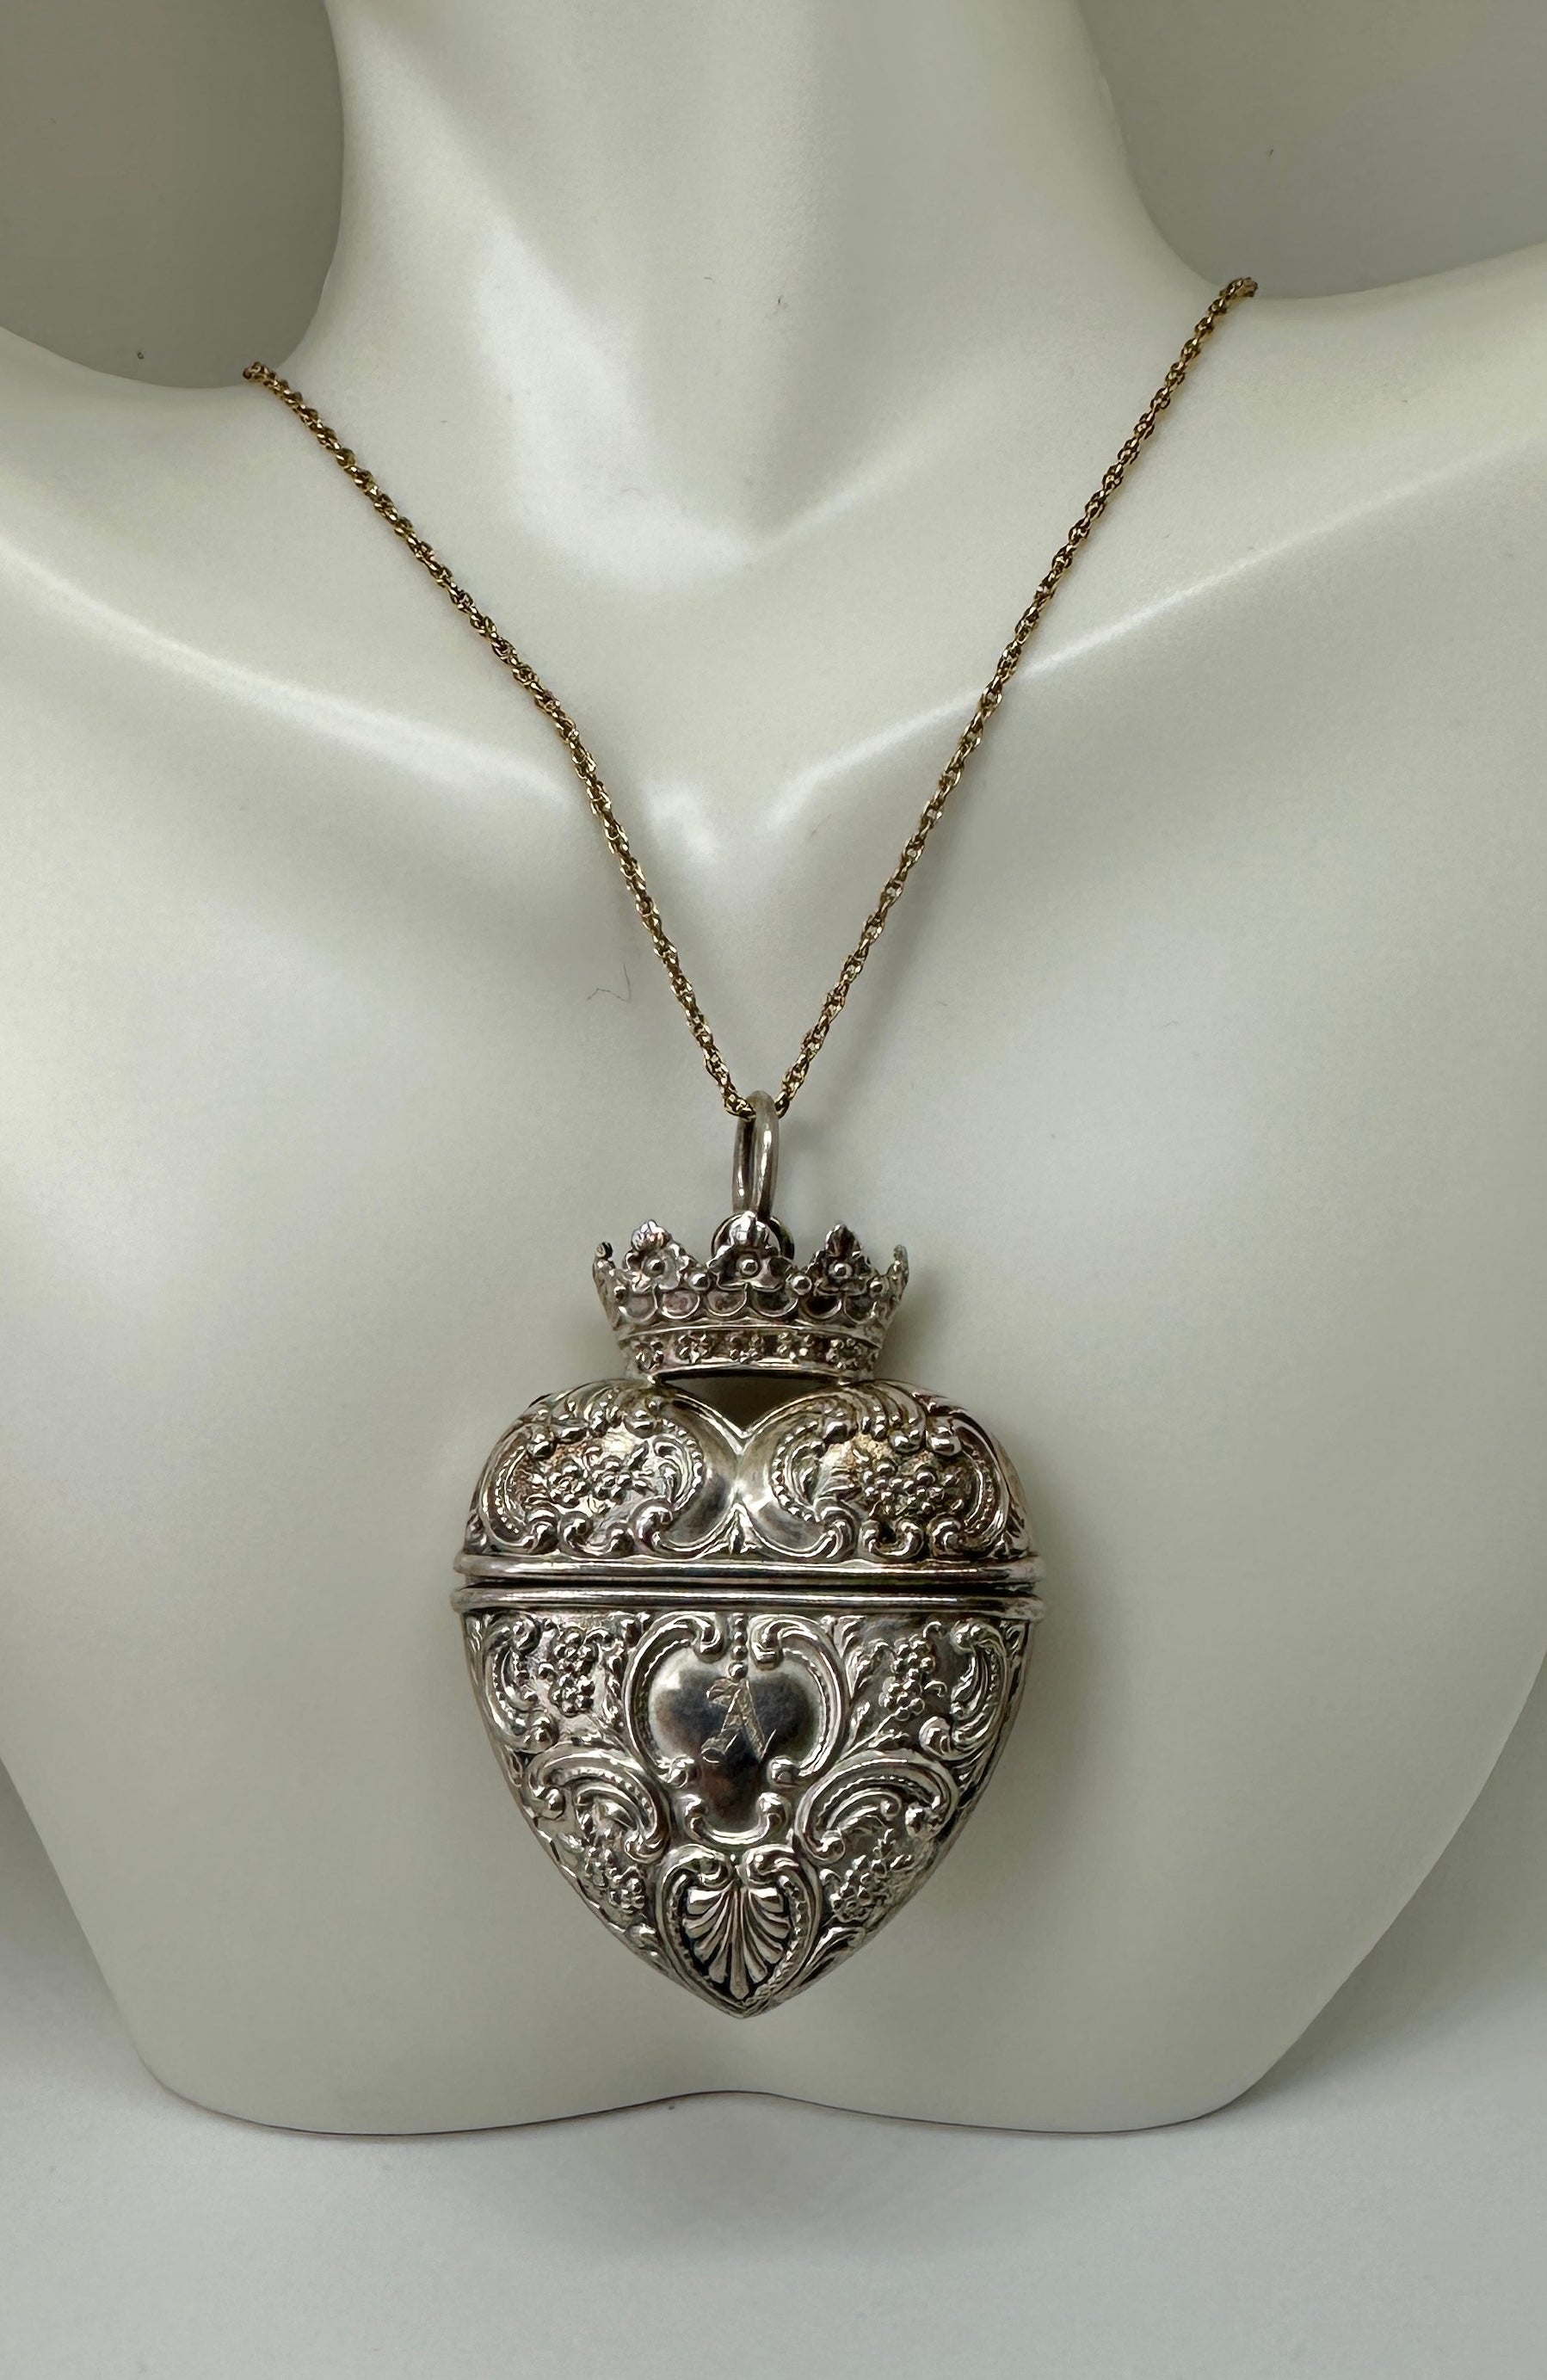 THIS IS A WONDERFUL ANTIQUE VICTORIAN HEART SHAPE LOCKET OR PERFUME VINAIGRETTE BY THE ESTEEMED AMERICAN SILVERSMITH FOSTER & BAILEY.
THE SILVER LOCKET PENDANT IS IN THE FORM OF A HEART.  IT HAS BEAUTIFUL ACANTHUS LEAF SCROLL MOTIF AND FLOWER MOTIF